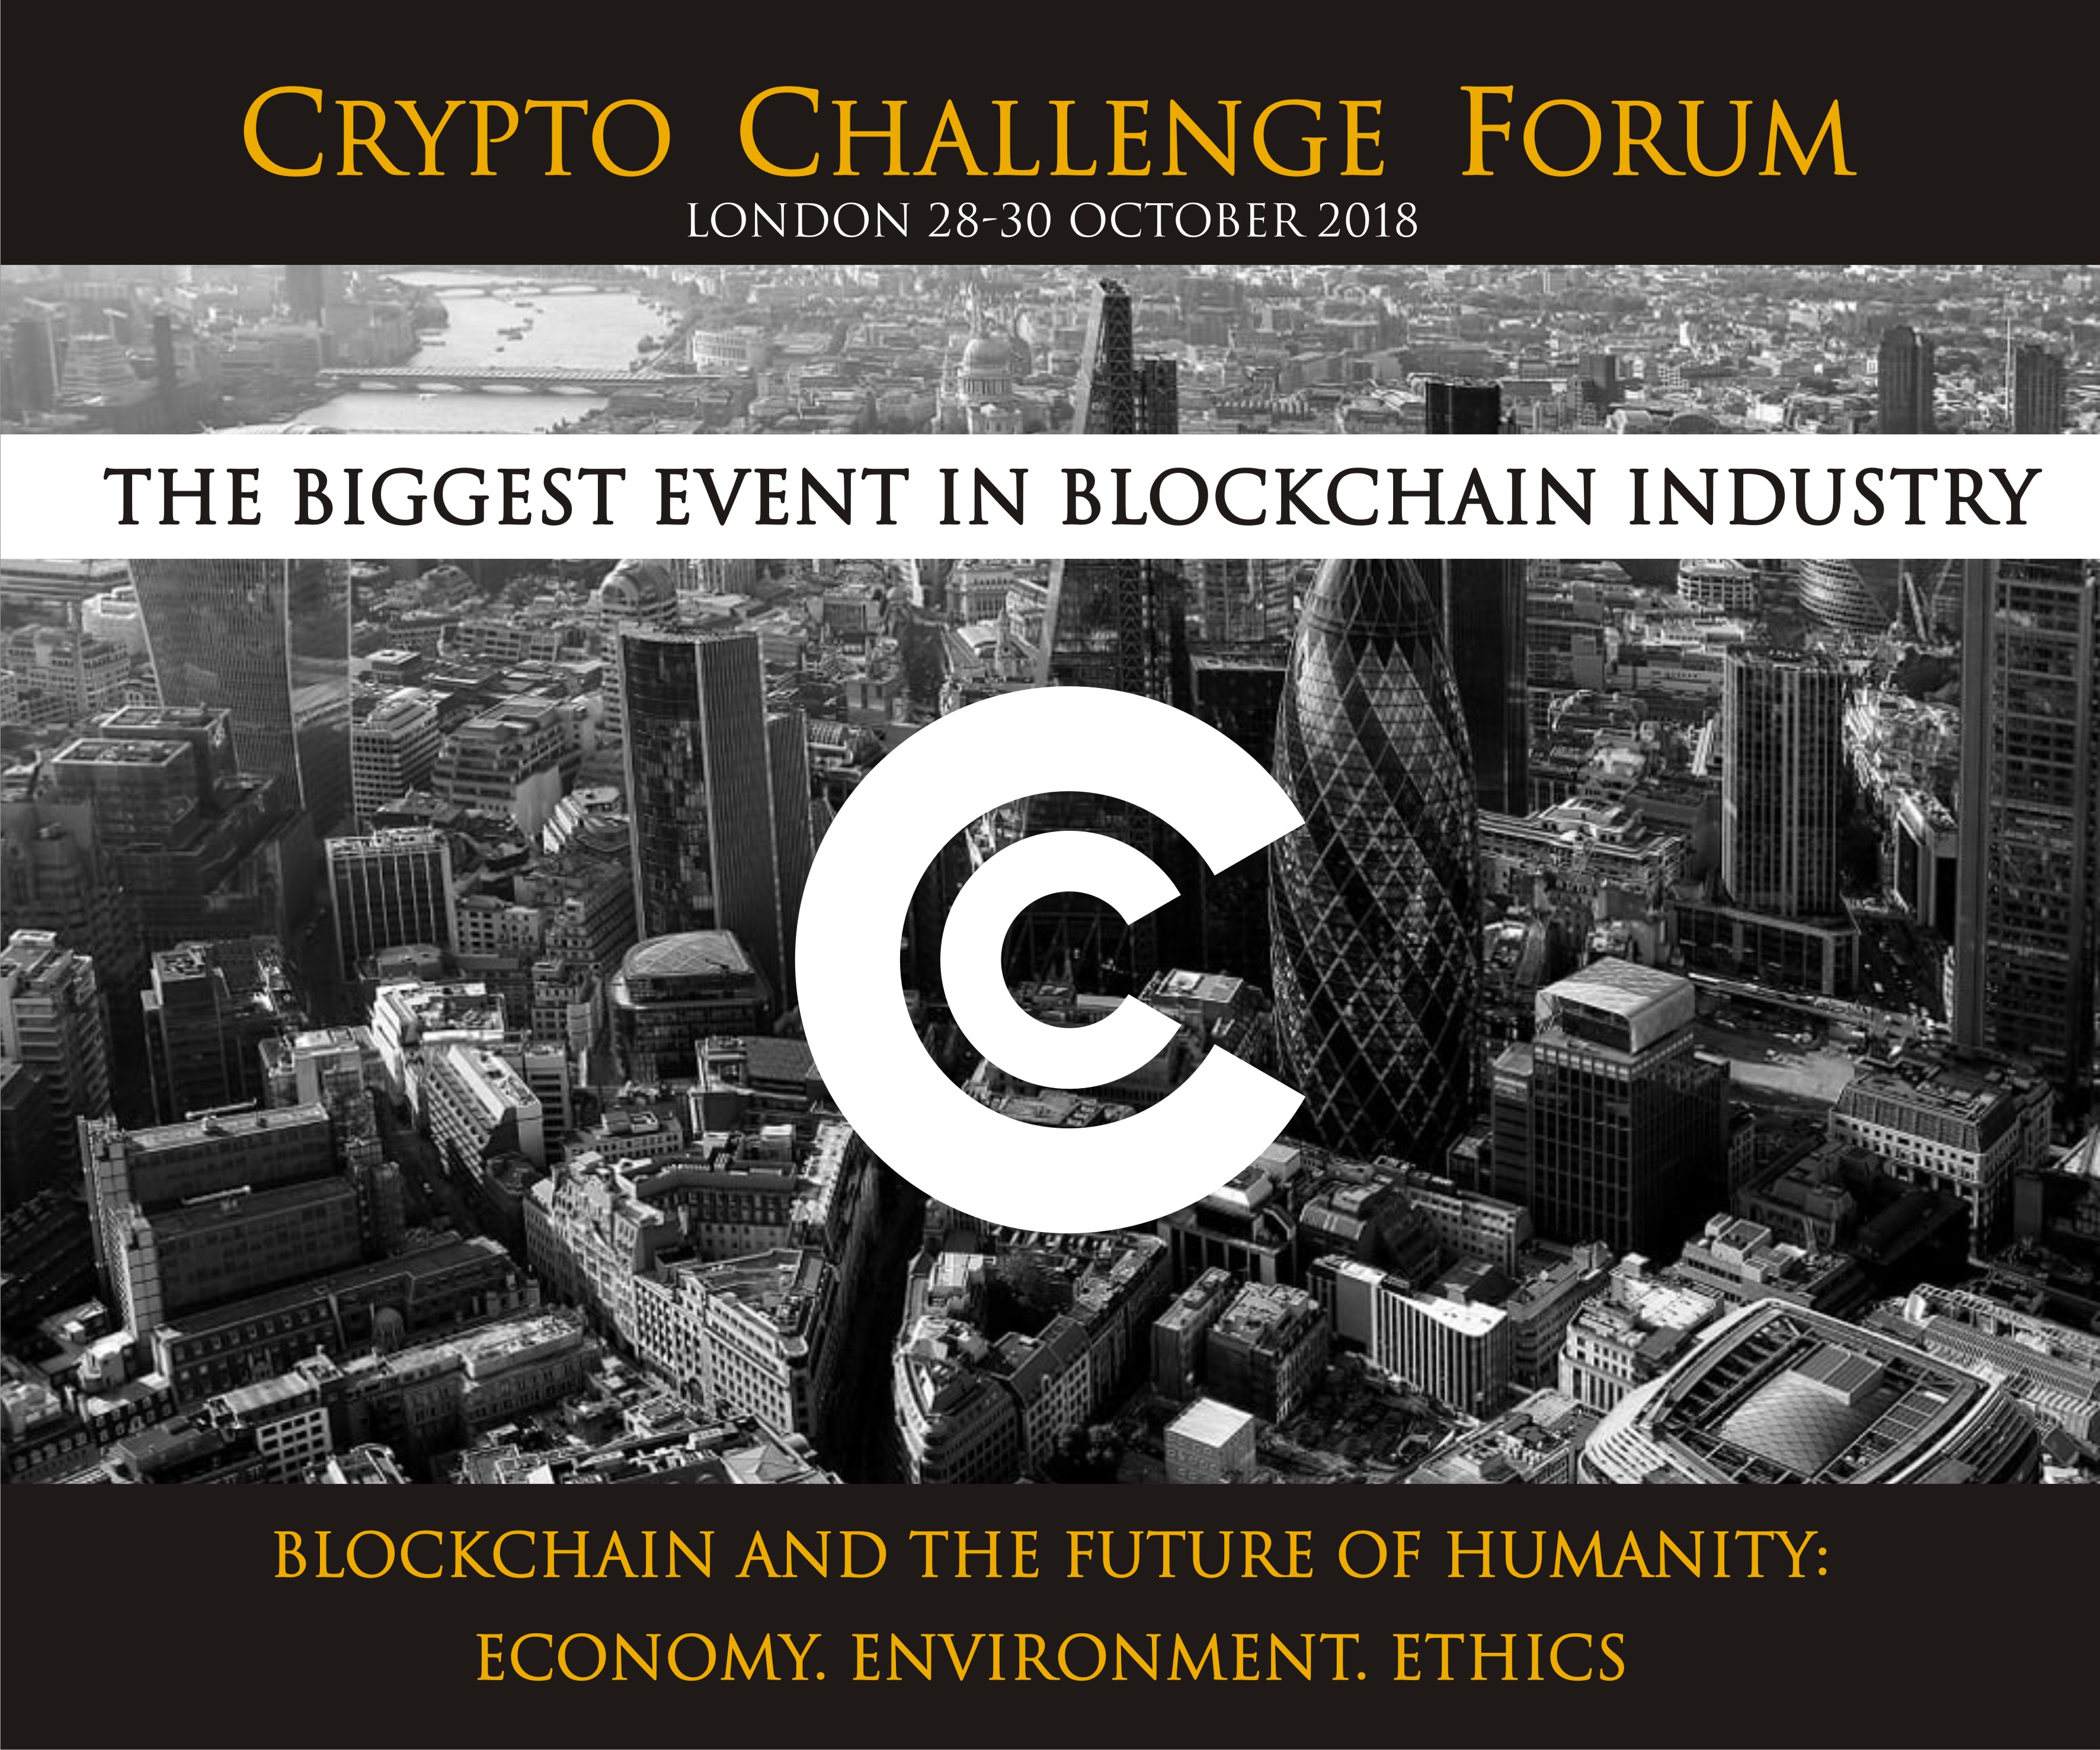 Crypto Challenge Forum connects global thought leaders, policy makers, investors and startups from across the world for a 3 day top content event